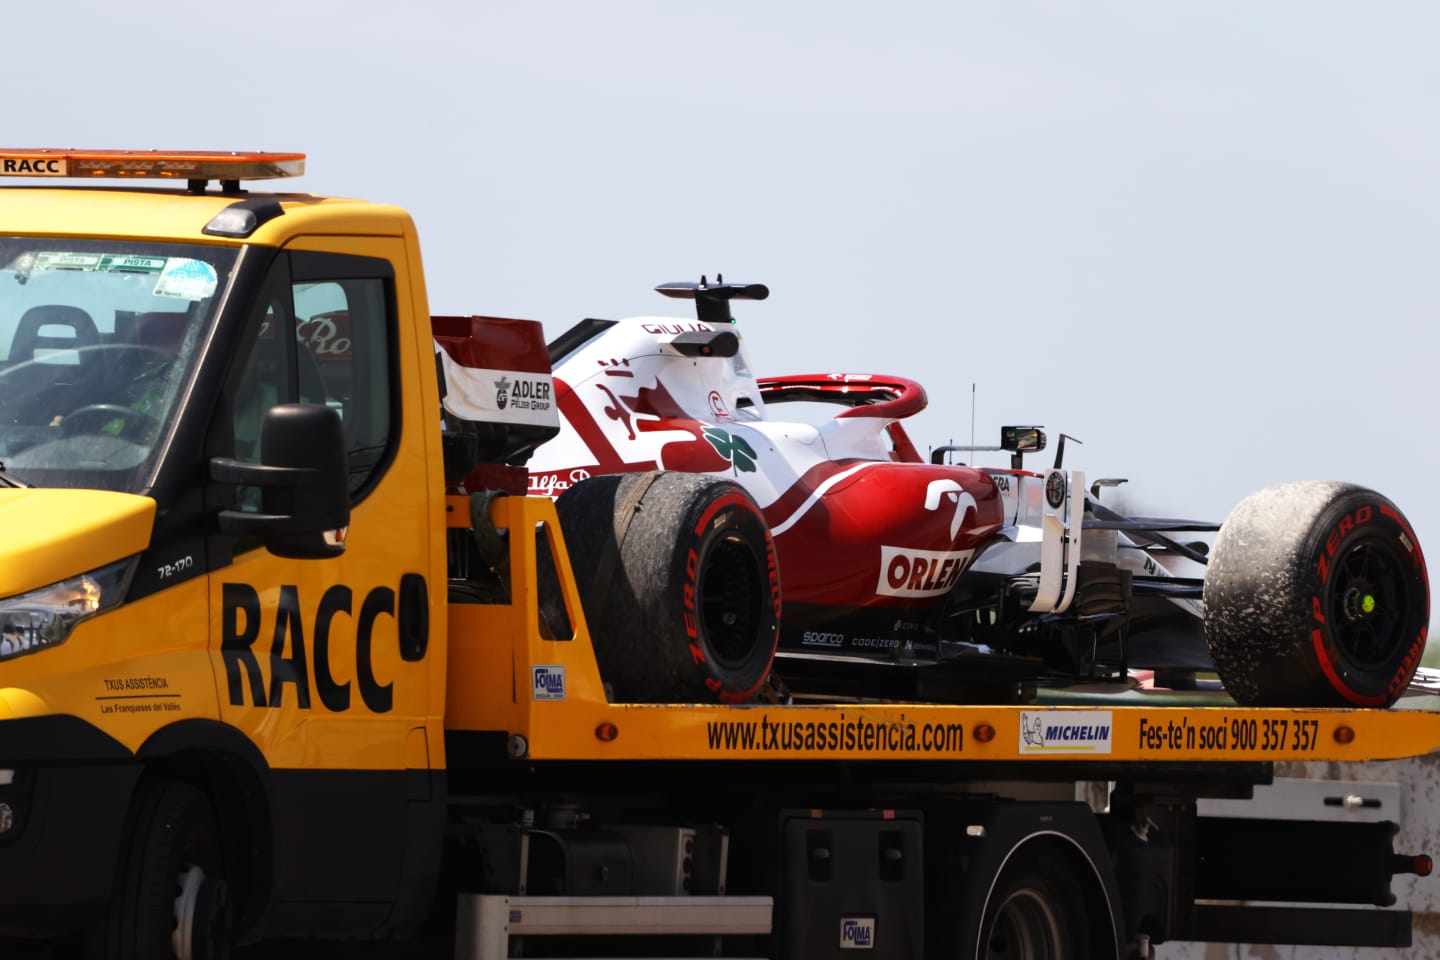 BARCELONA, SPAIN - MAY 07: The car of Robert Kubica of Poland and Alfa Romeo Racing is seen on a tow truck after stopping on track during practice for the F1 Grand Prix of Spain at Circuit de Barcelona-Catalunya on May 07, 2021 in Barcelona, Spain. (Photo by Bryn Lennon/Getty Images)